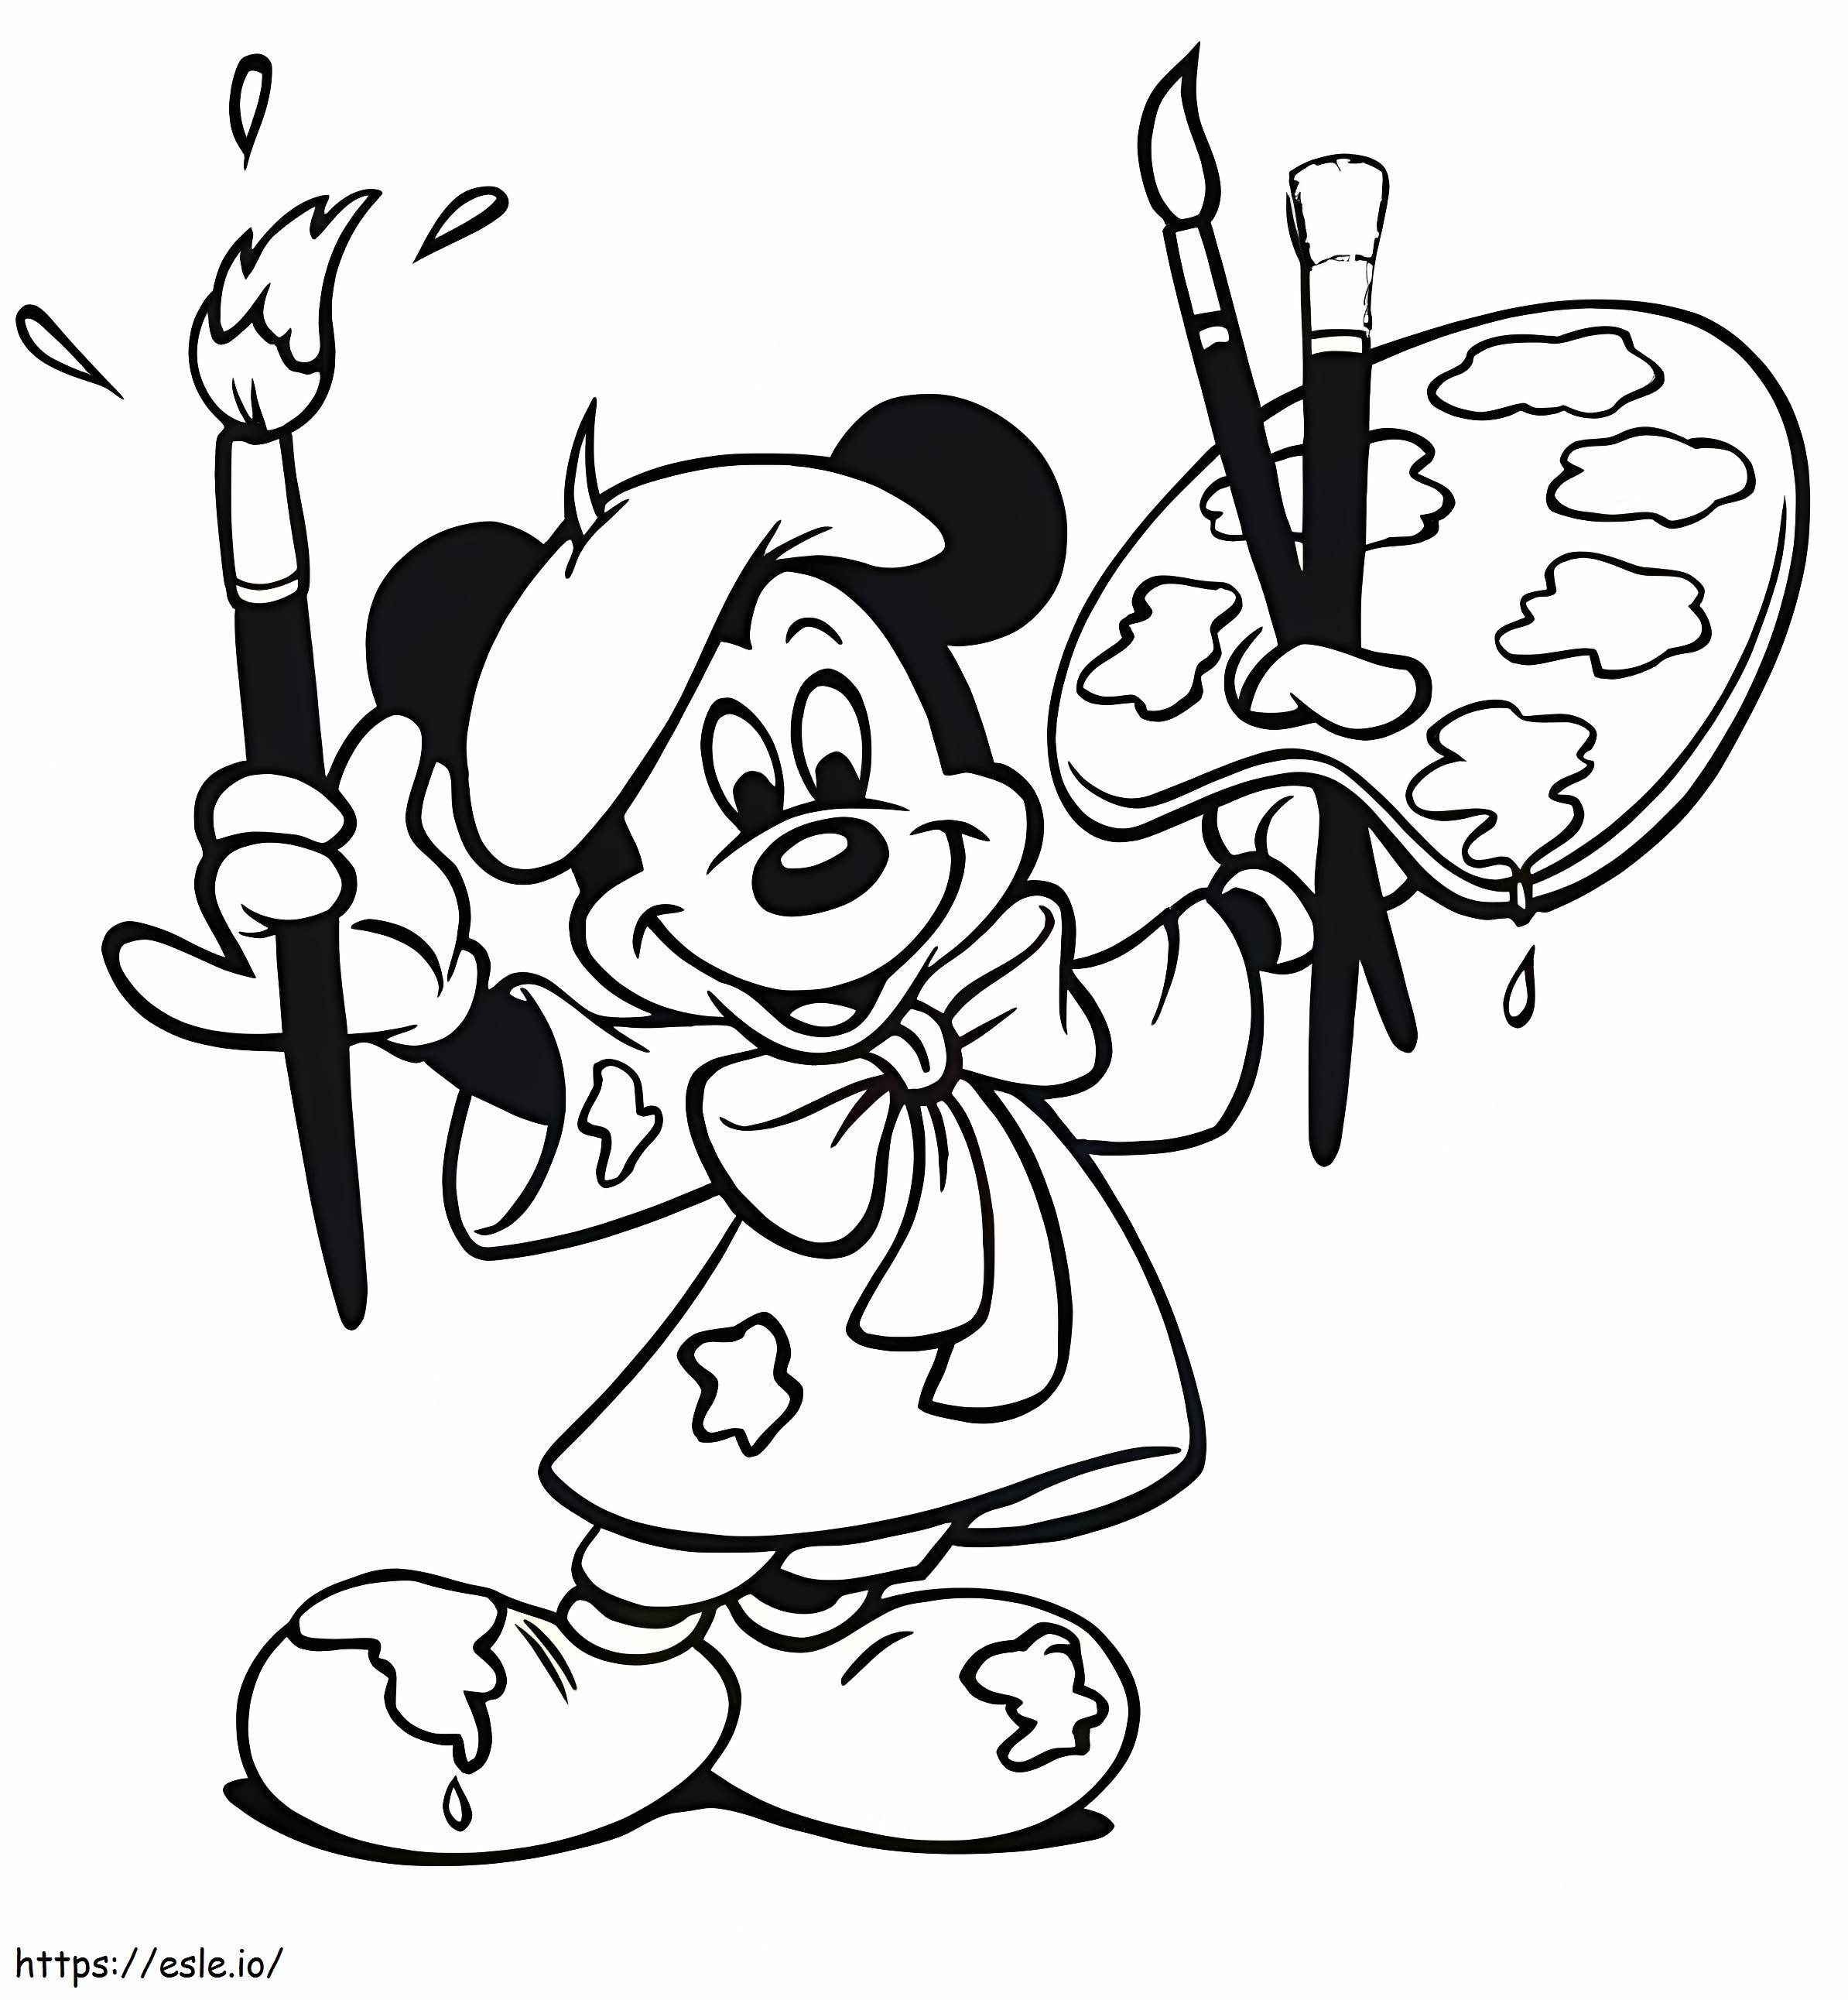 Mickey Mouse The Artist coloring page